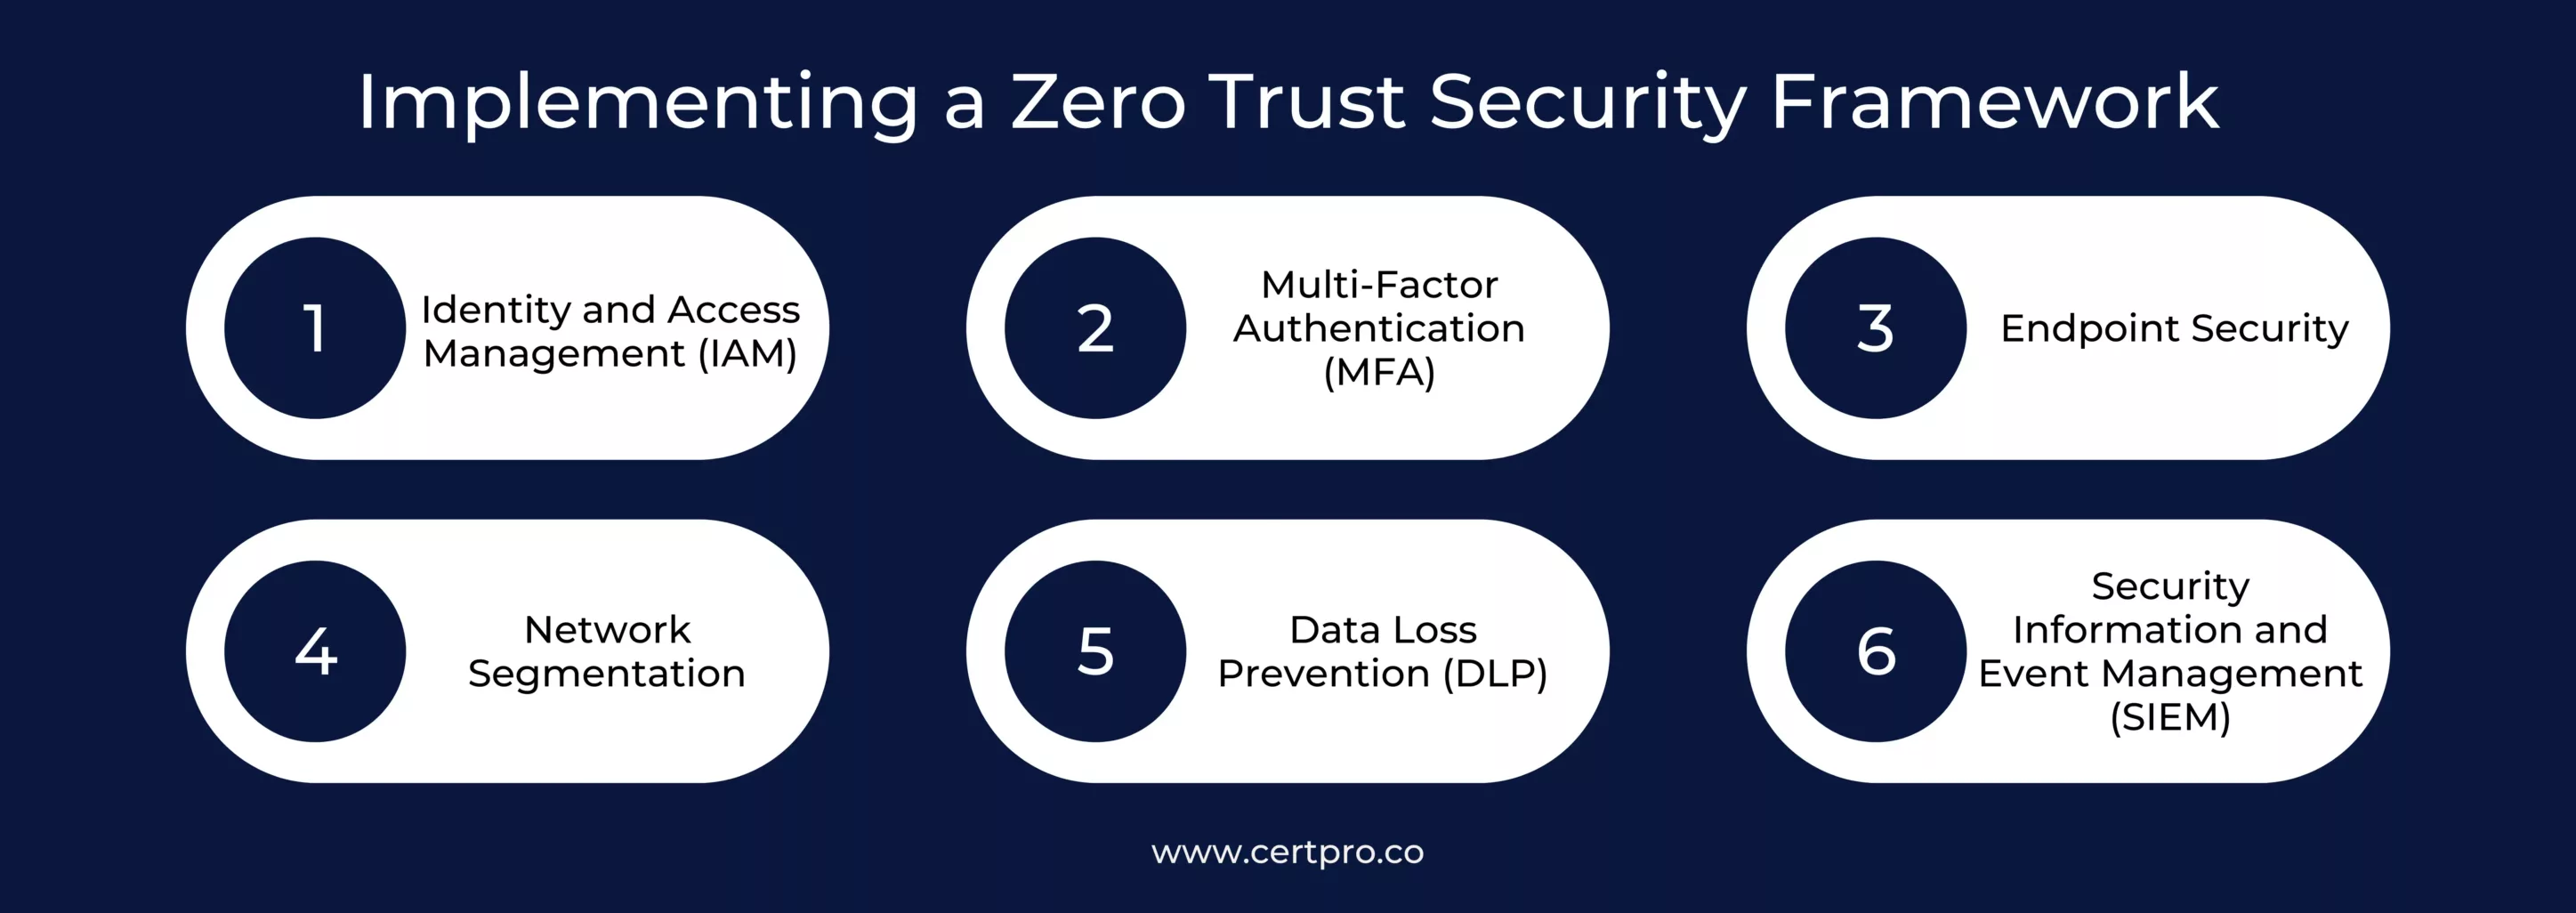 Implementing a Zero Trust Security Framework